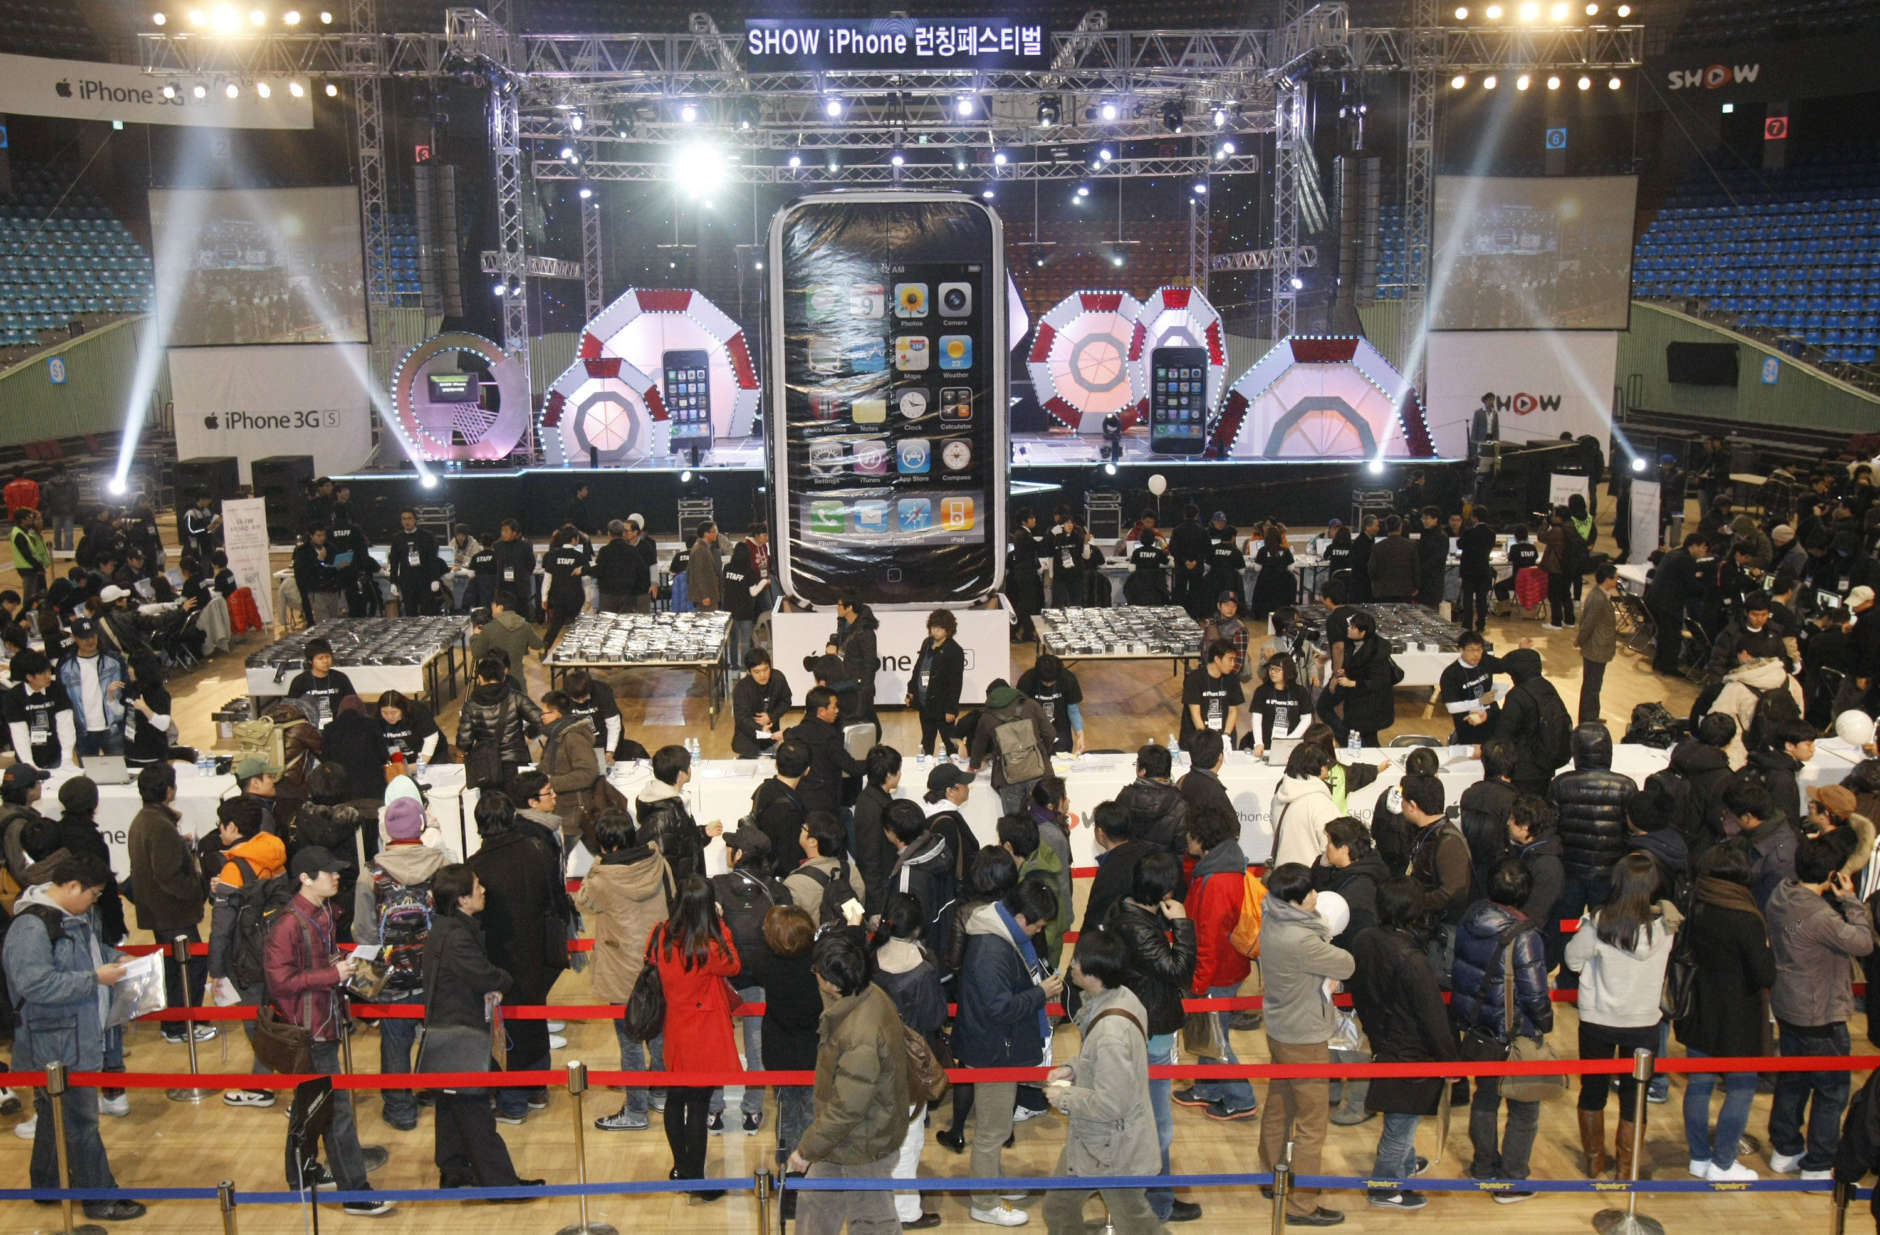 Fans of iPhon line up as they wait to purchase the Apple iPhone 3G during its launching ceremony in Seoul, Saturday, Nov. 28, 2009. South Koreans began getting their coveted iPhones on Saturday amid fanfare and expectations they will shake up a local market dominated by domestic giants Samsung and LG. (AP Photo/Ahn Young-joon)